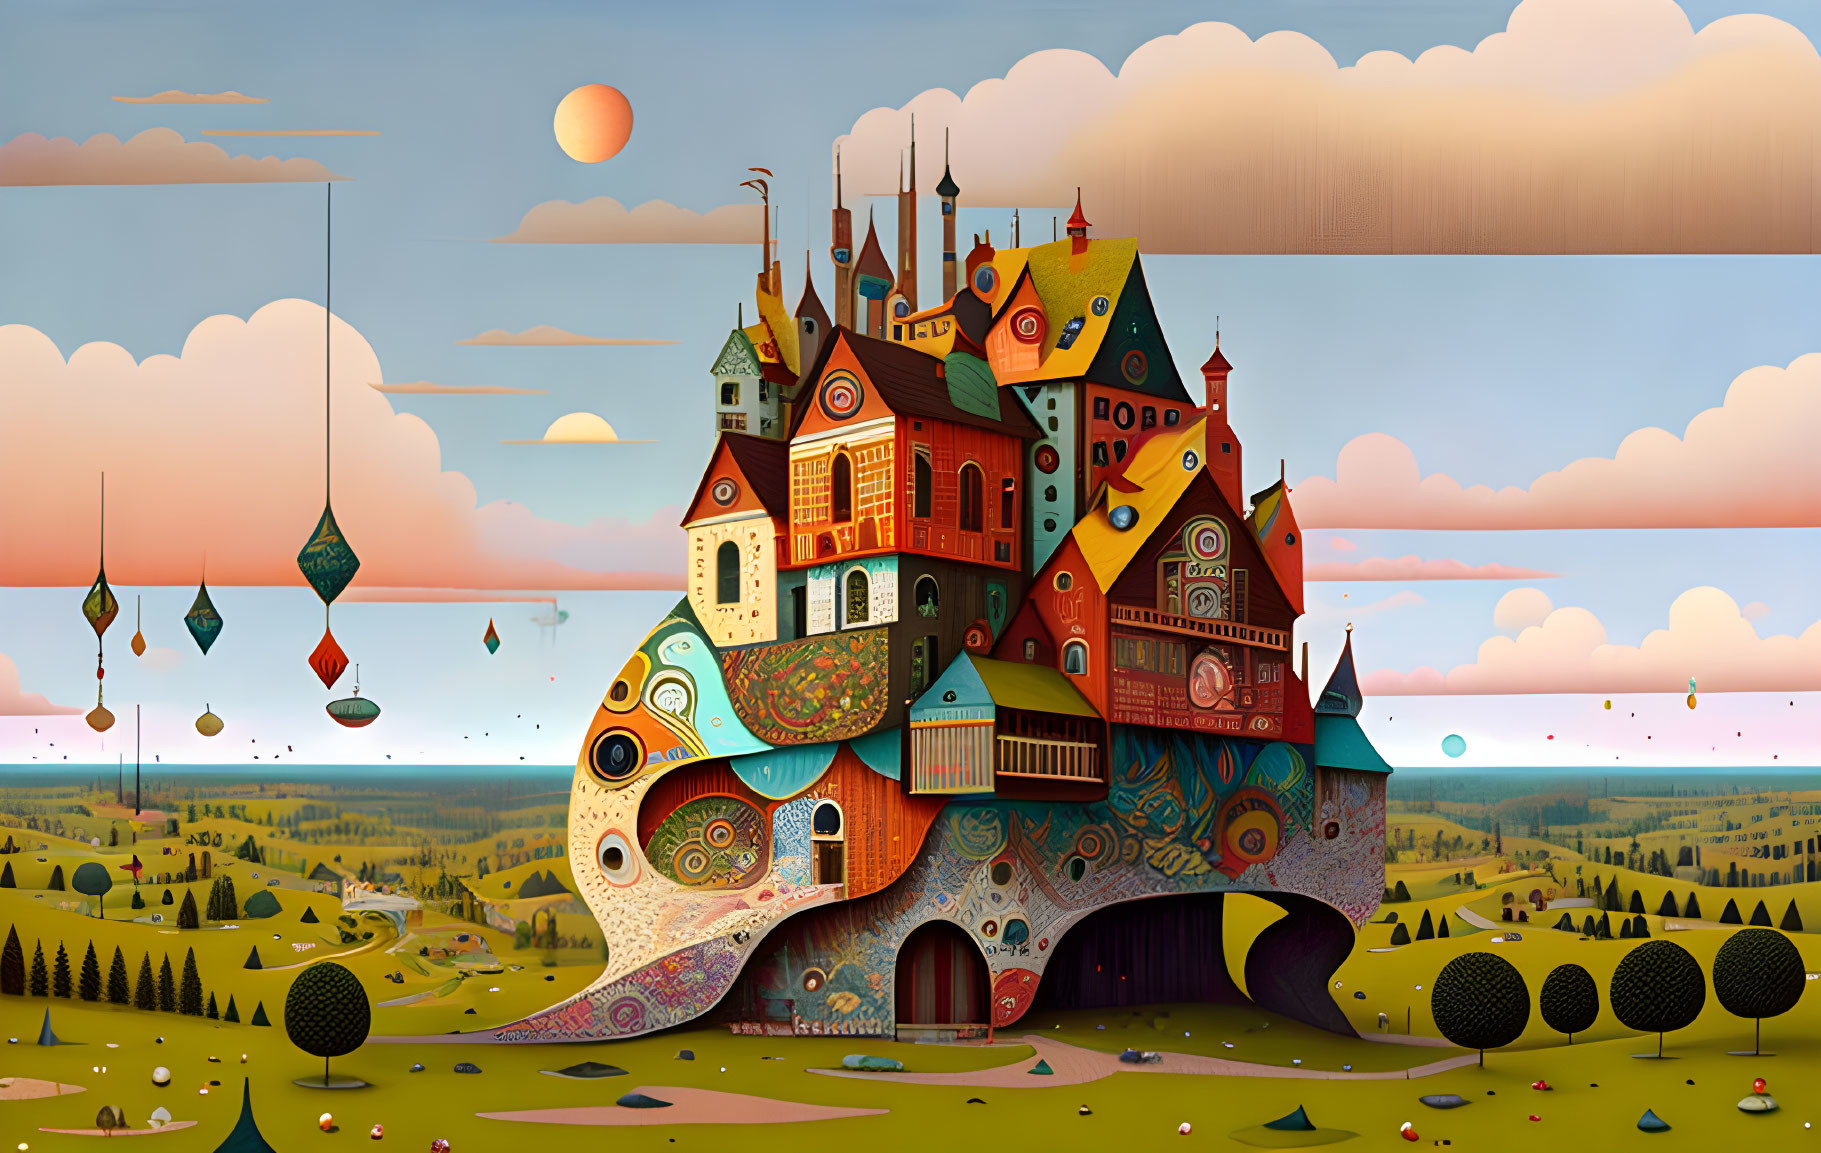 Colorful Whimsical Landscape with Oversized Fantastical House